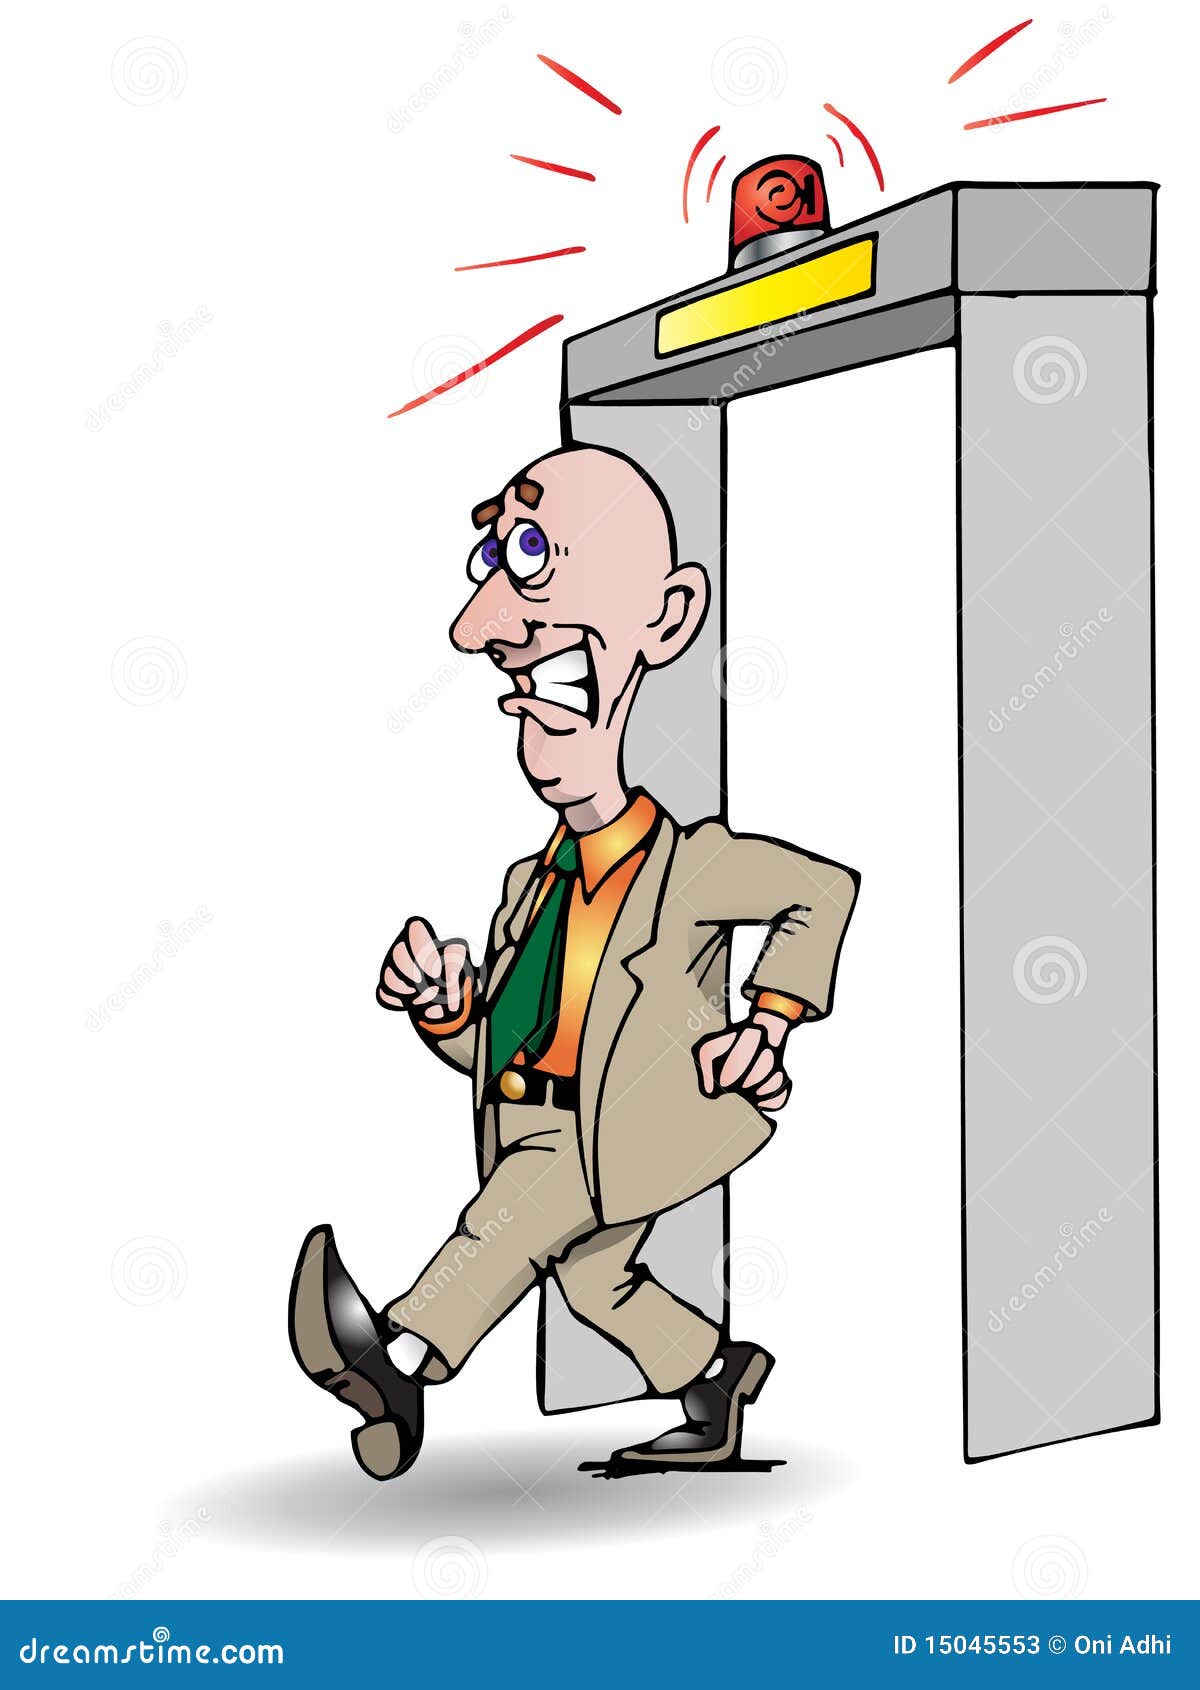 security check clipart - photo #5